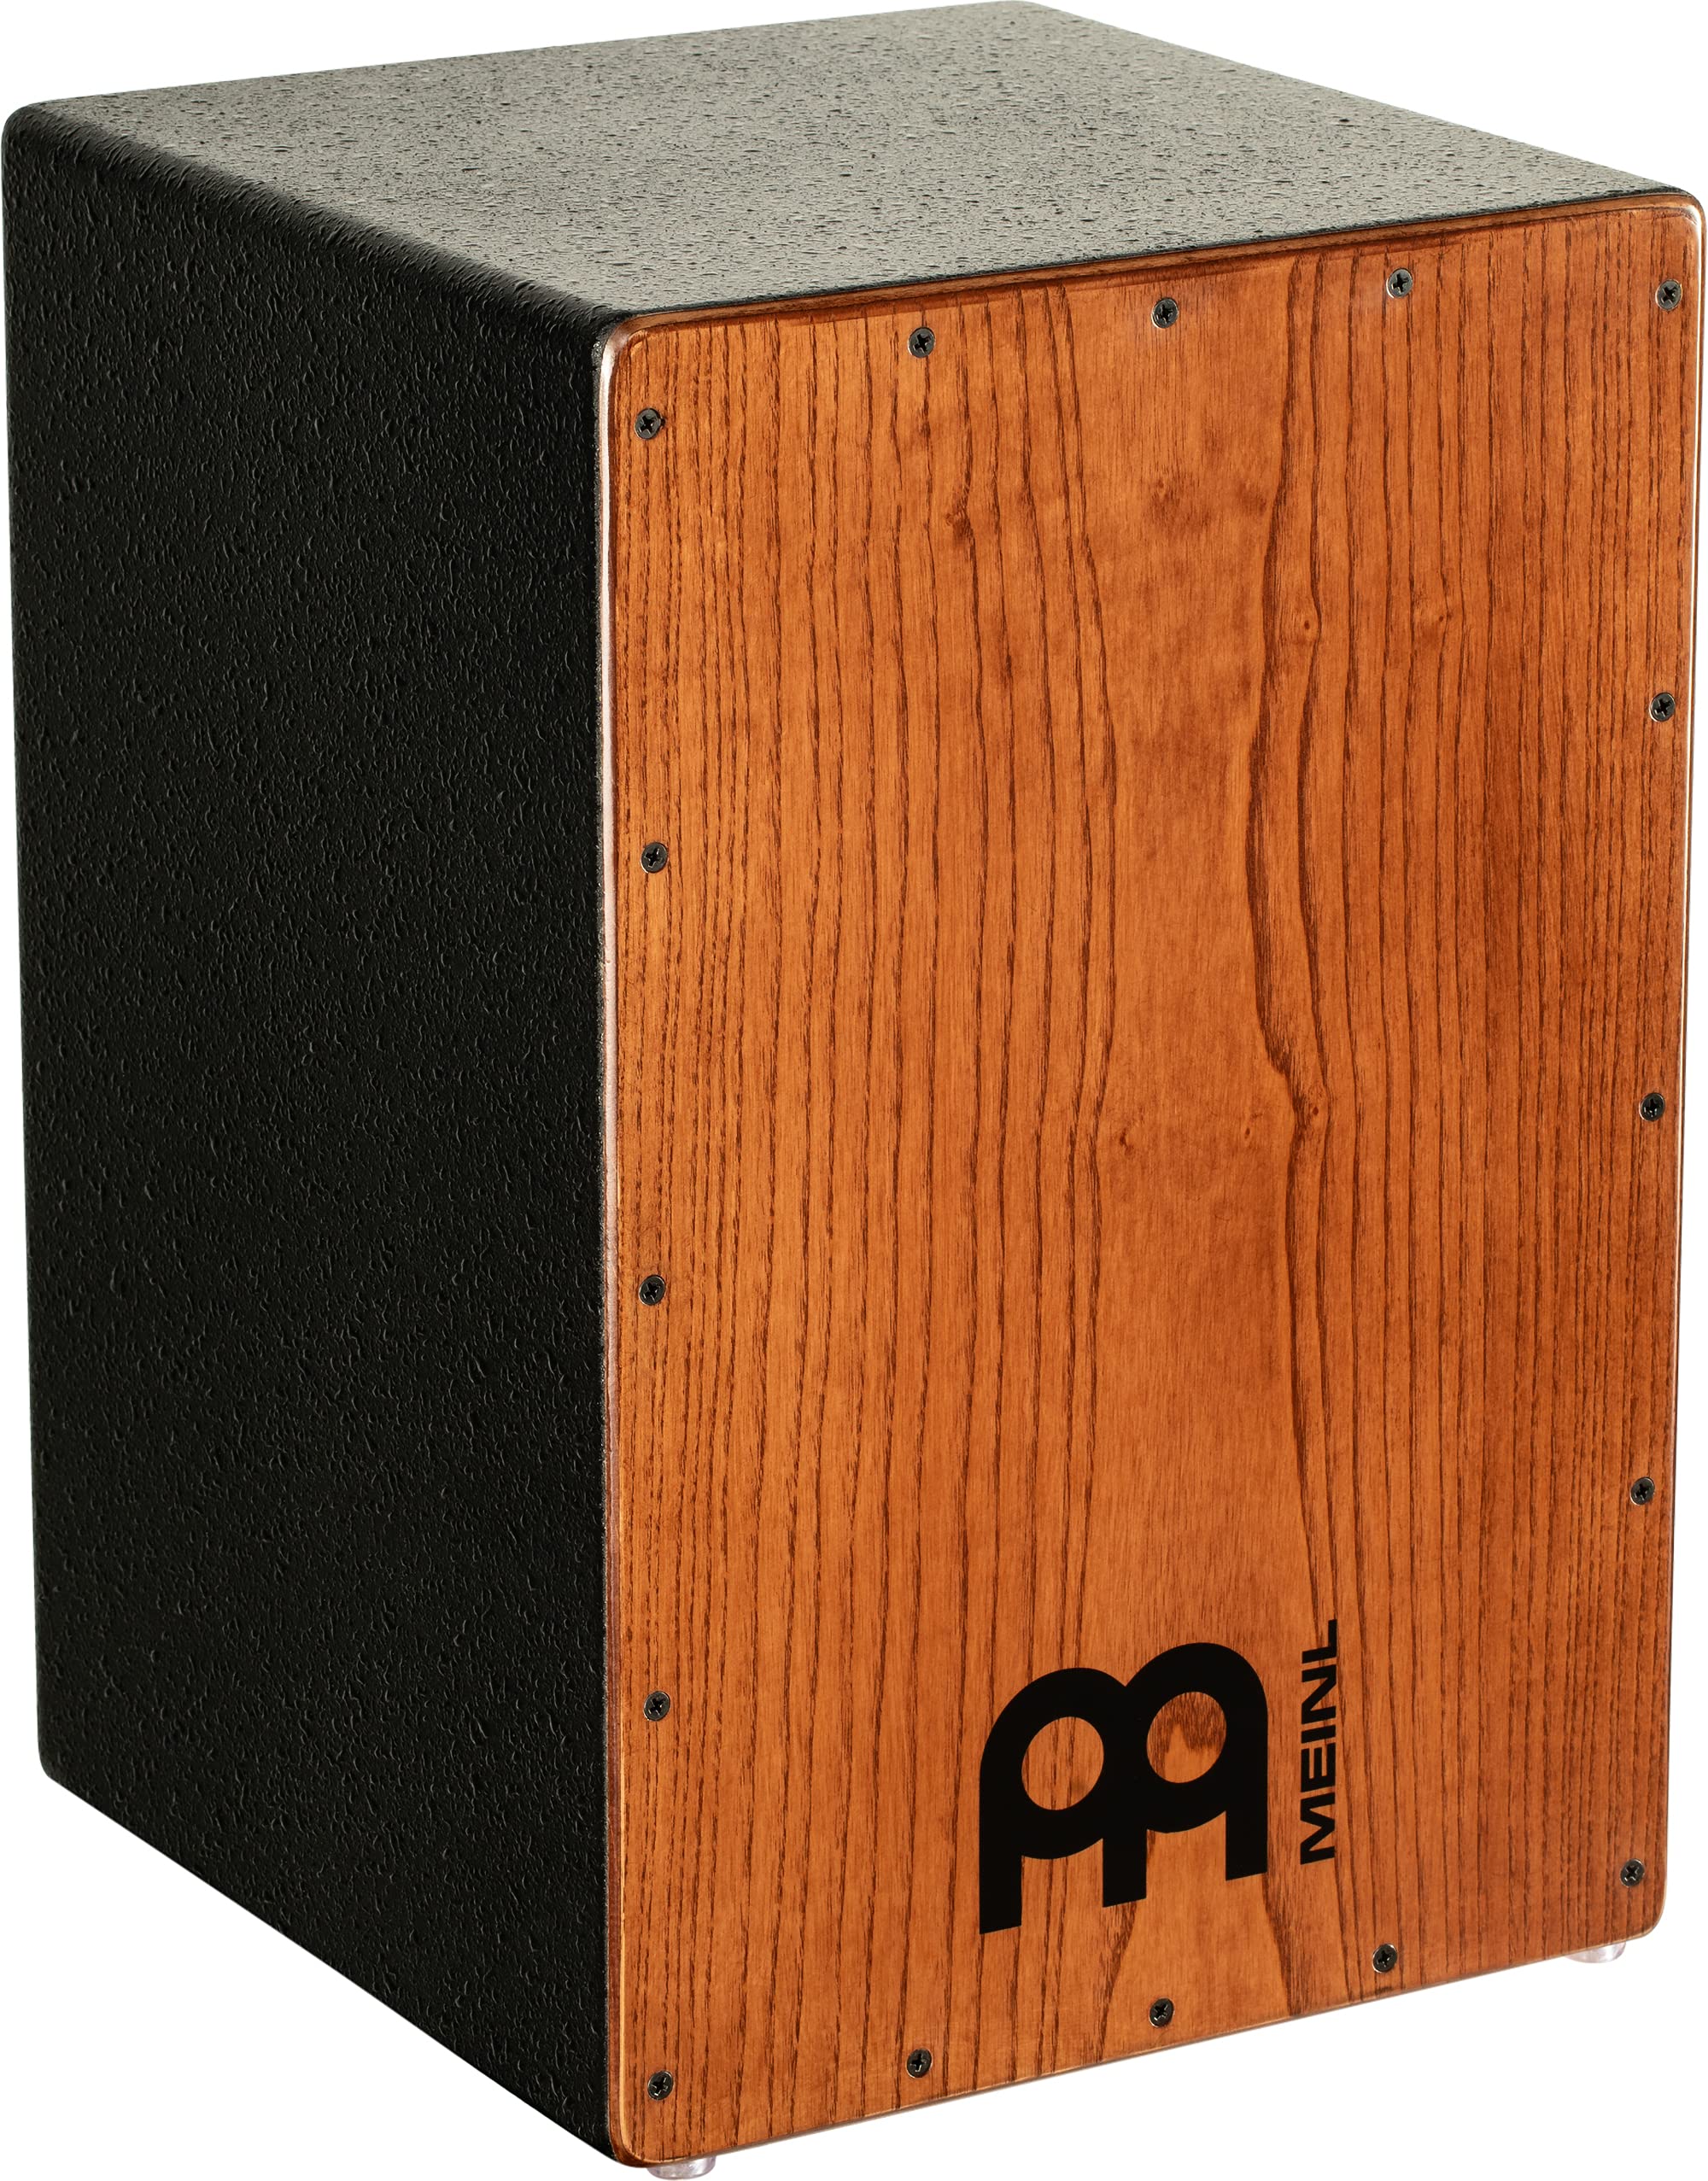 Meinl Stained American White Ash Headliner Series Cajons 